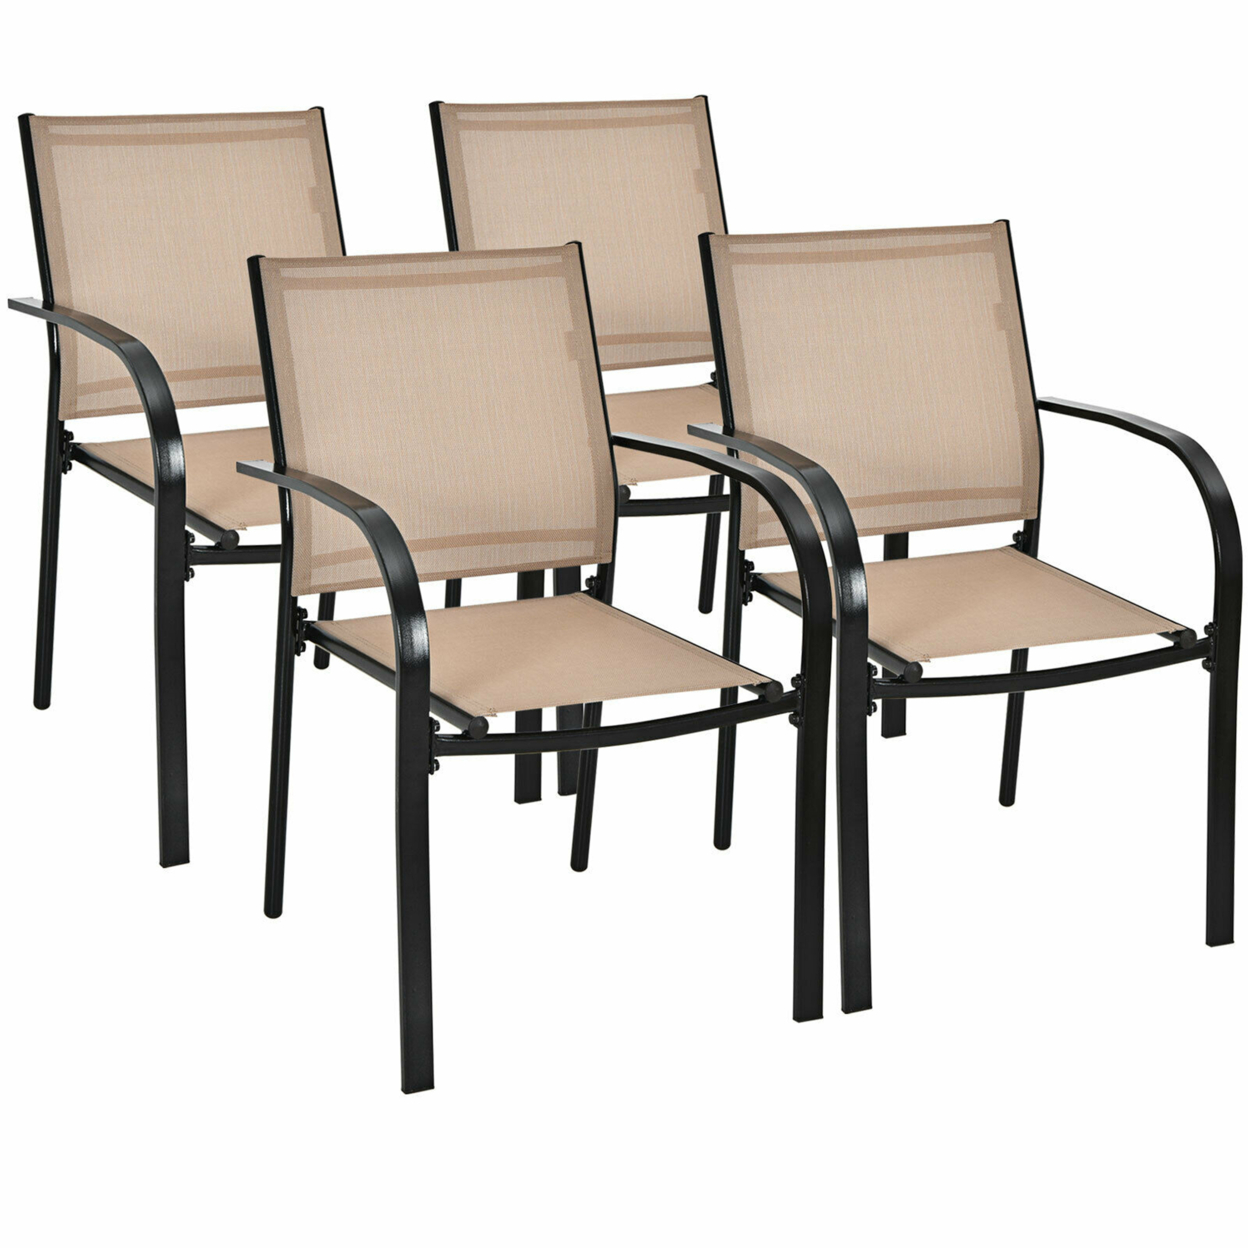 4PCS Stackable Patio Dining Chair W/ Steel Frame & Quick-drying Fabric